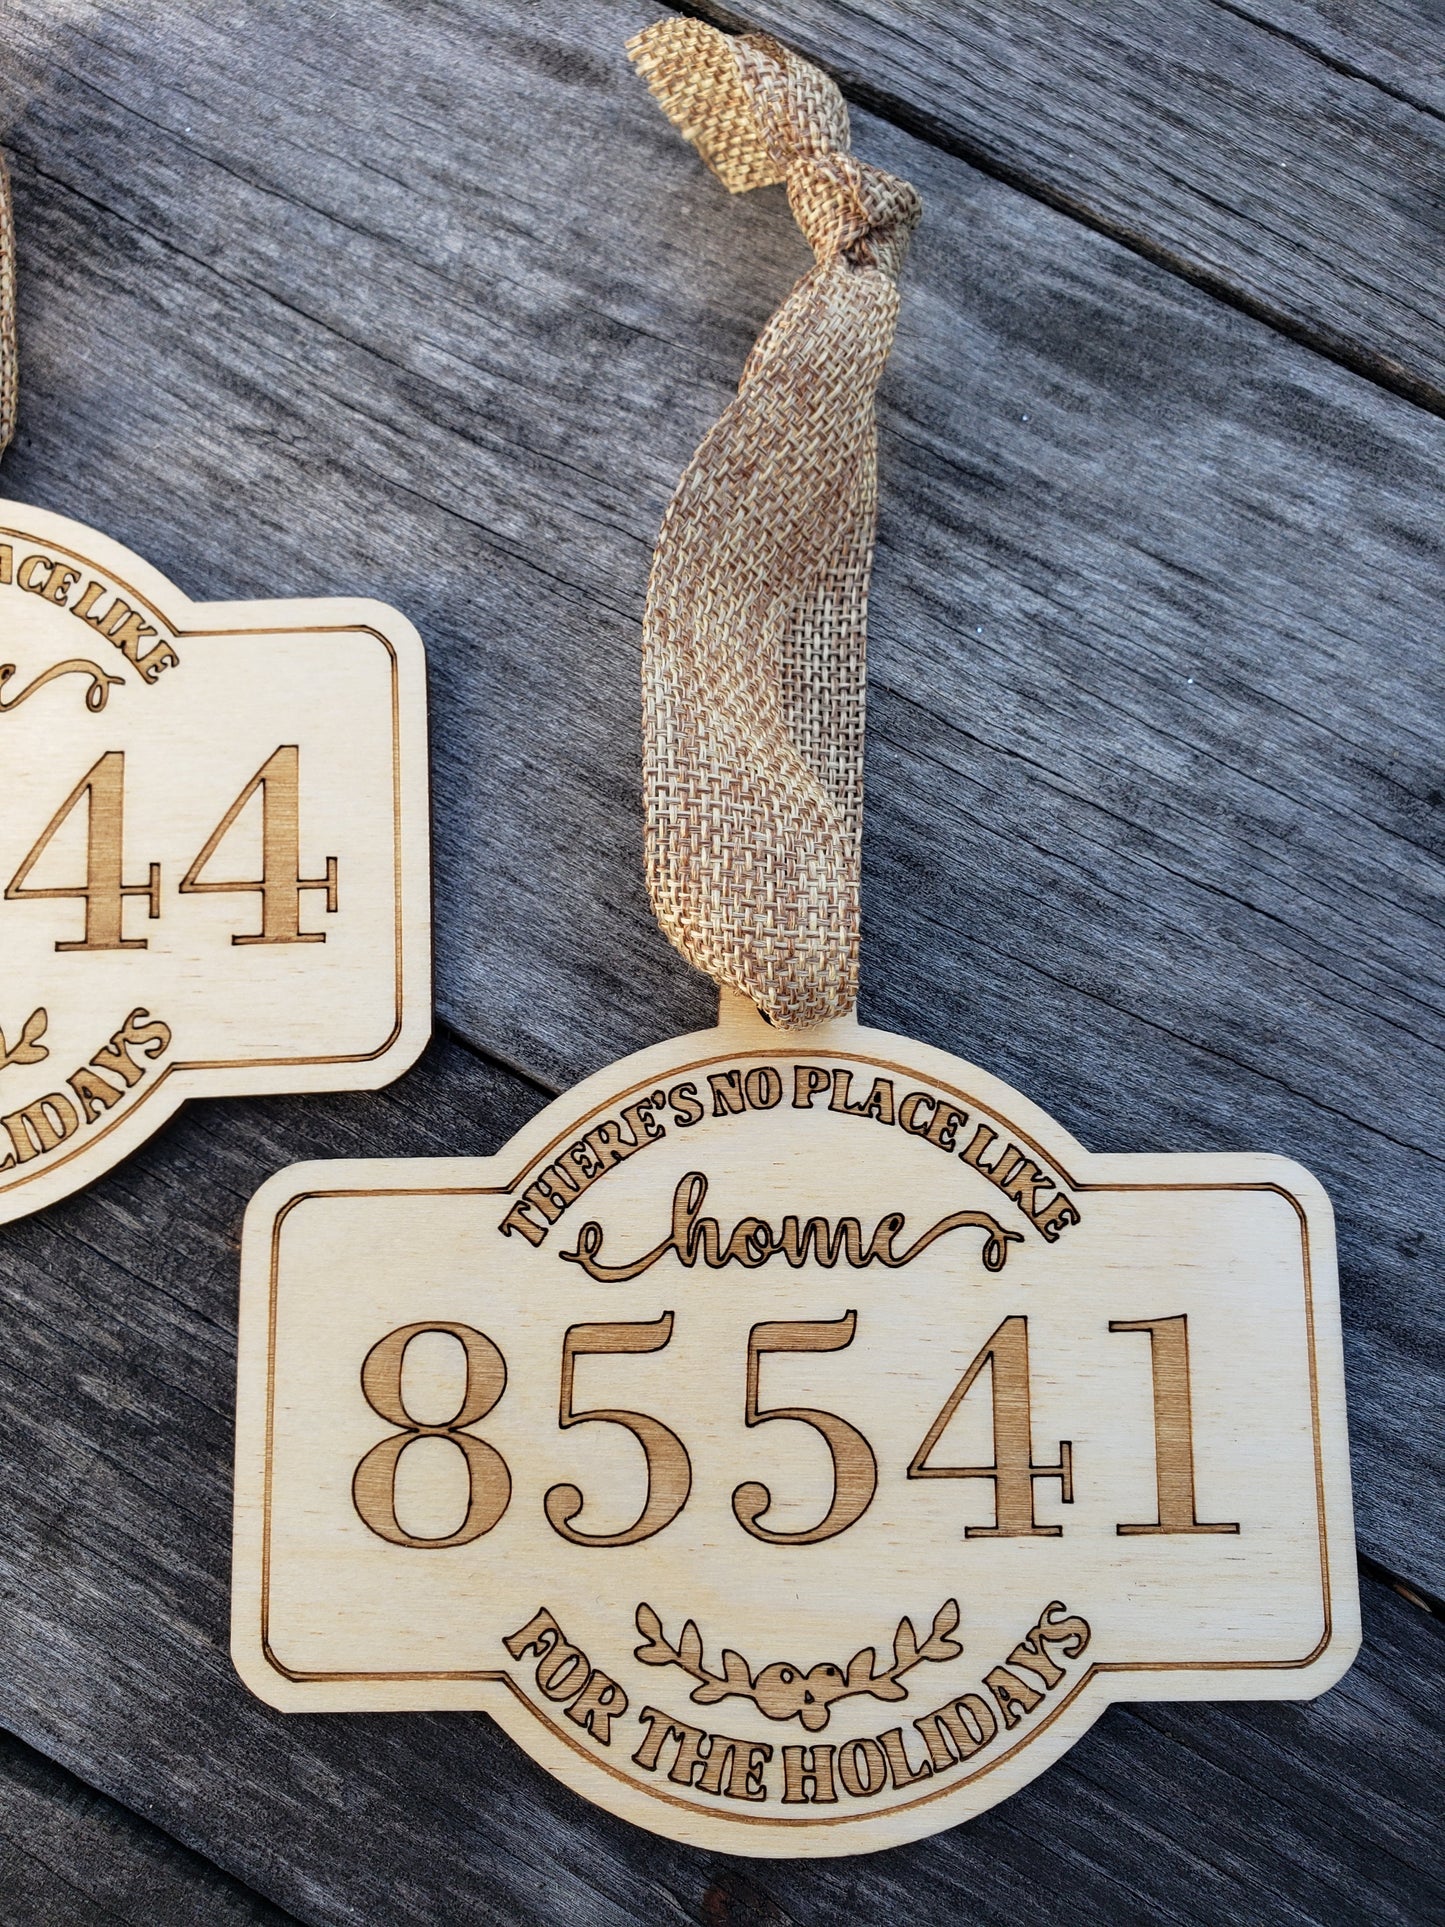 6 Pack of Zip code Christmas Ornament - "There's No Place Like Home"